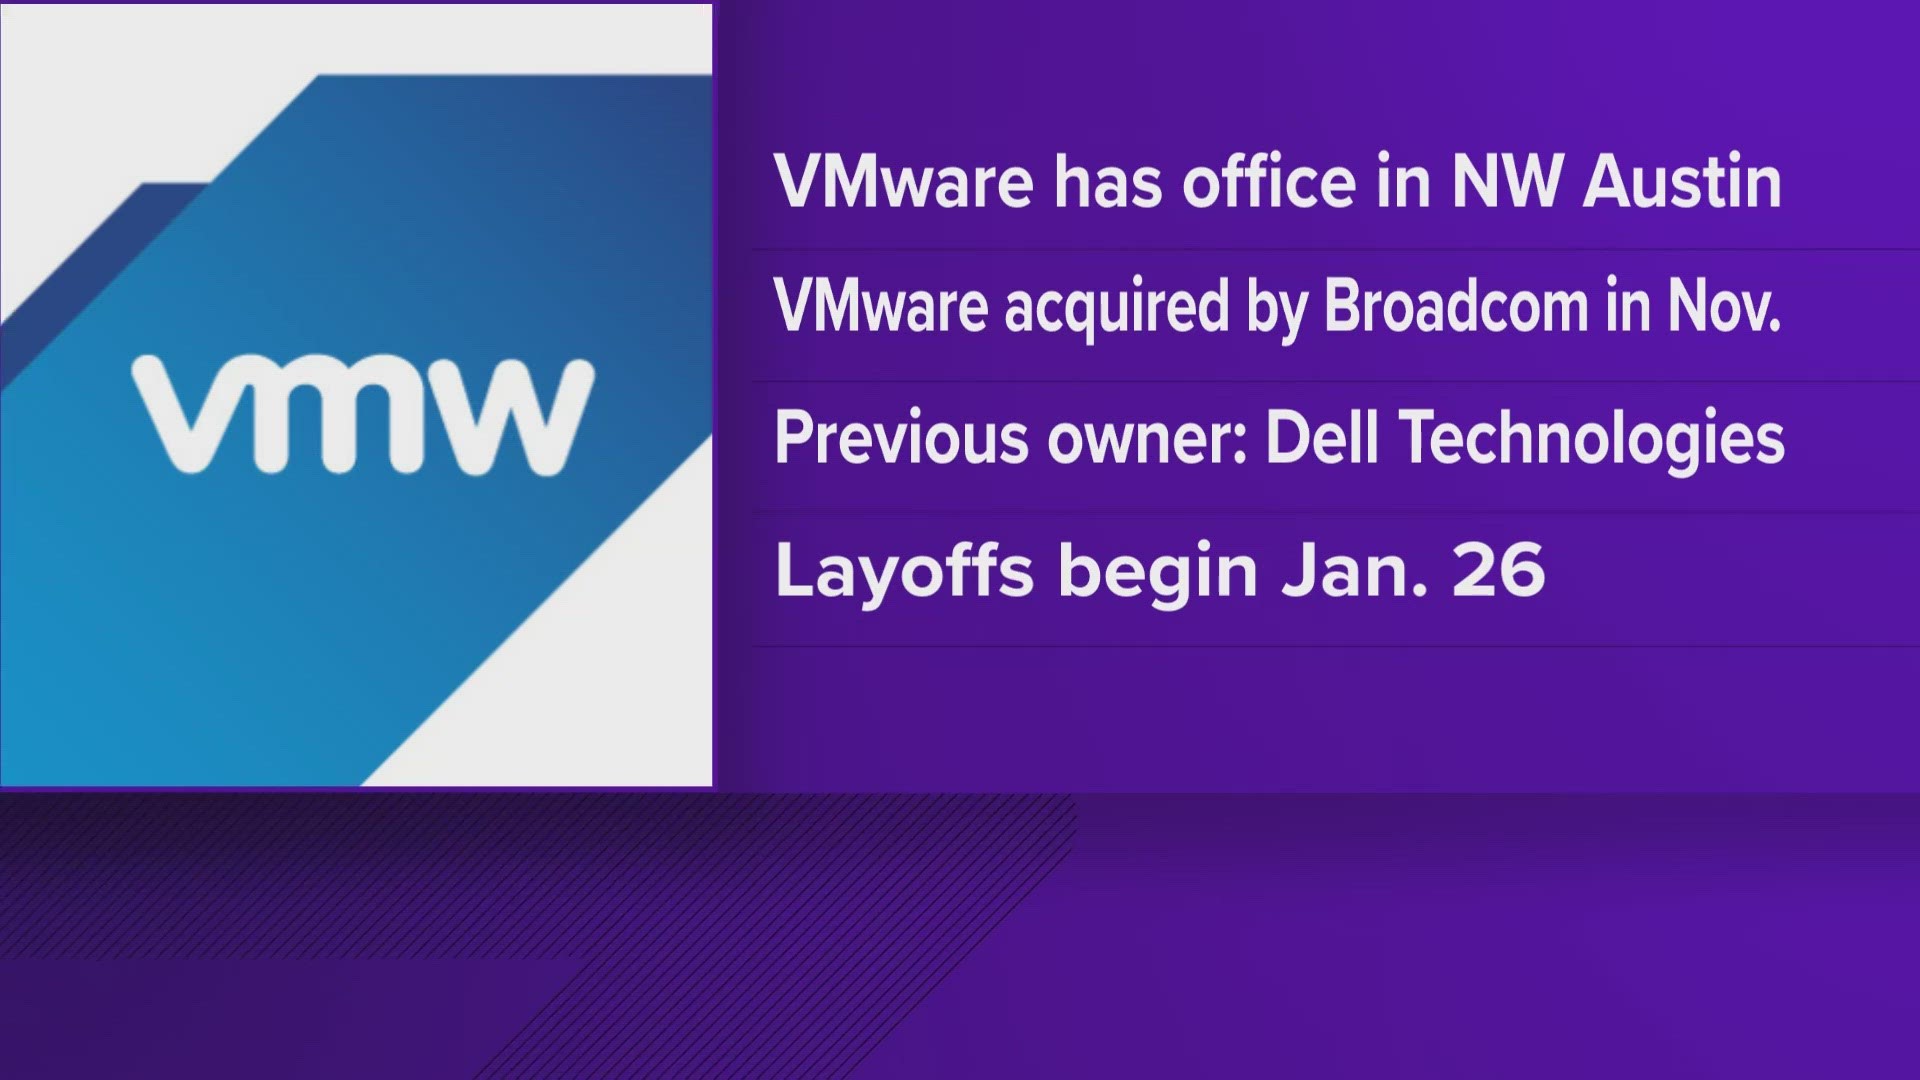 The impending layoffs, which will start Jan. 26, come after VMware was acquired by Broadcom from Dell Technologies for $61 billion.